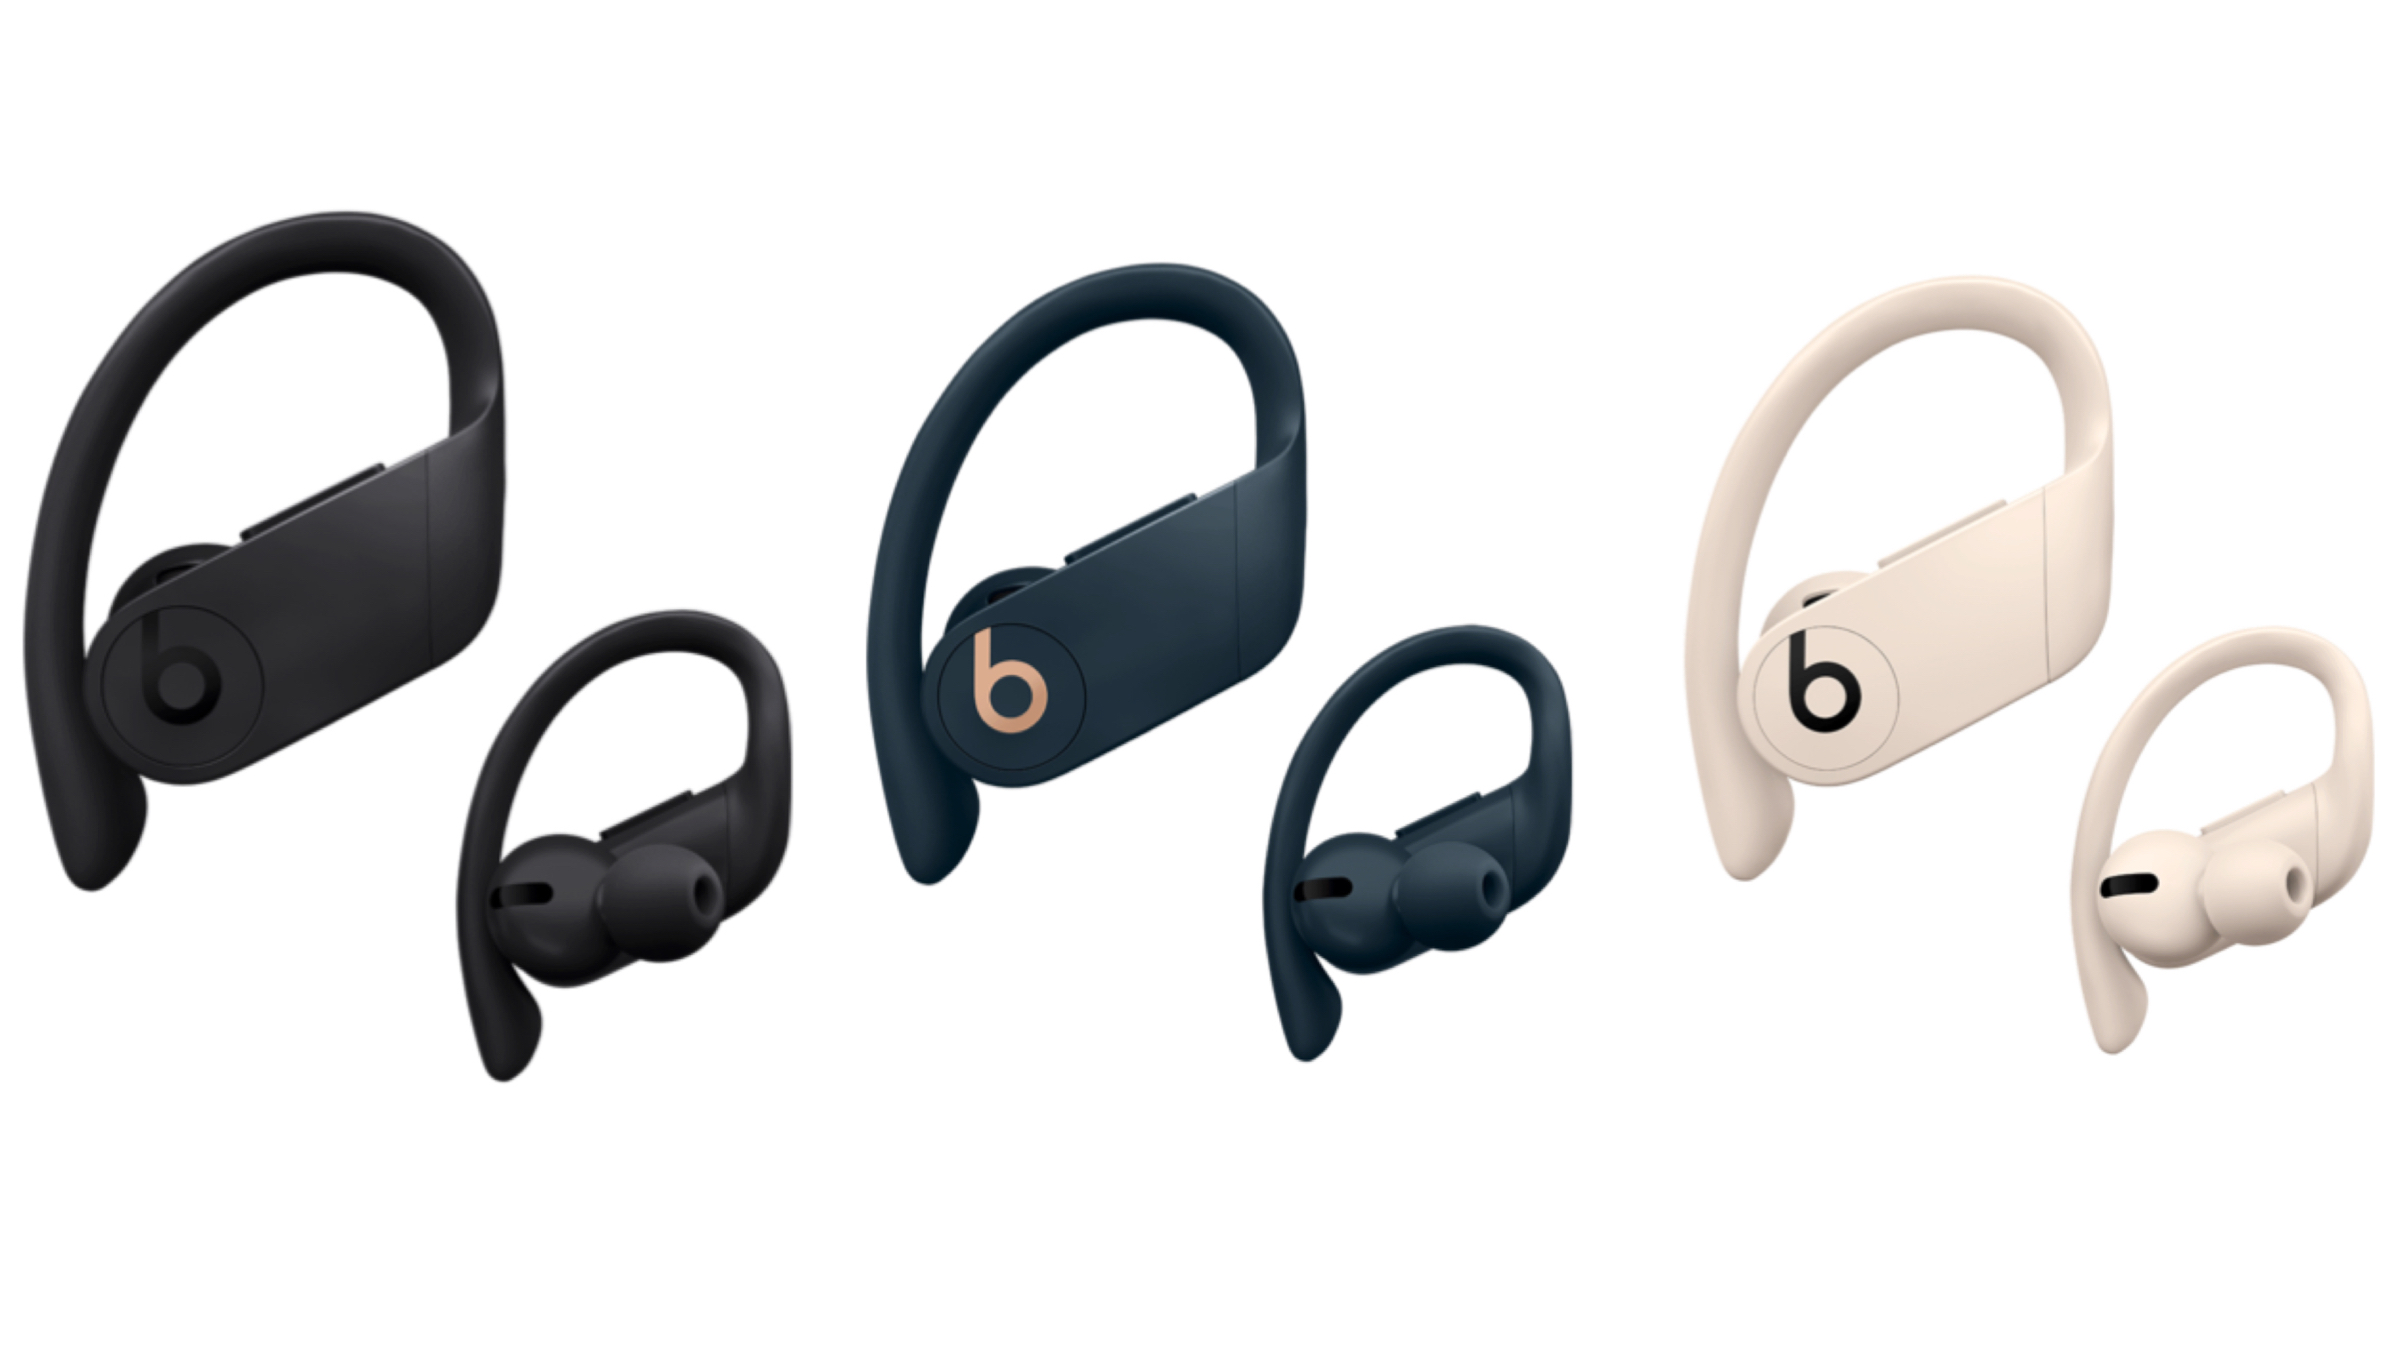 Powerbeats Pro True Wireless Earbuds Launched, Price | iGyaan Network